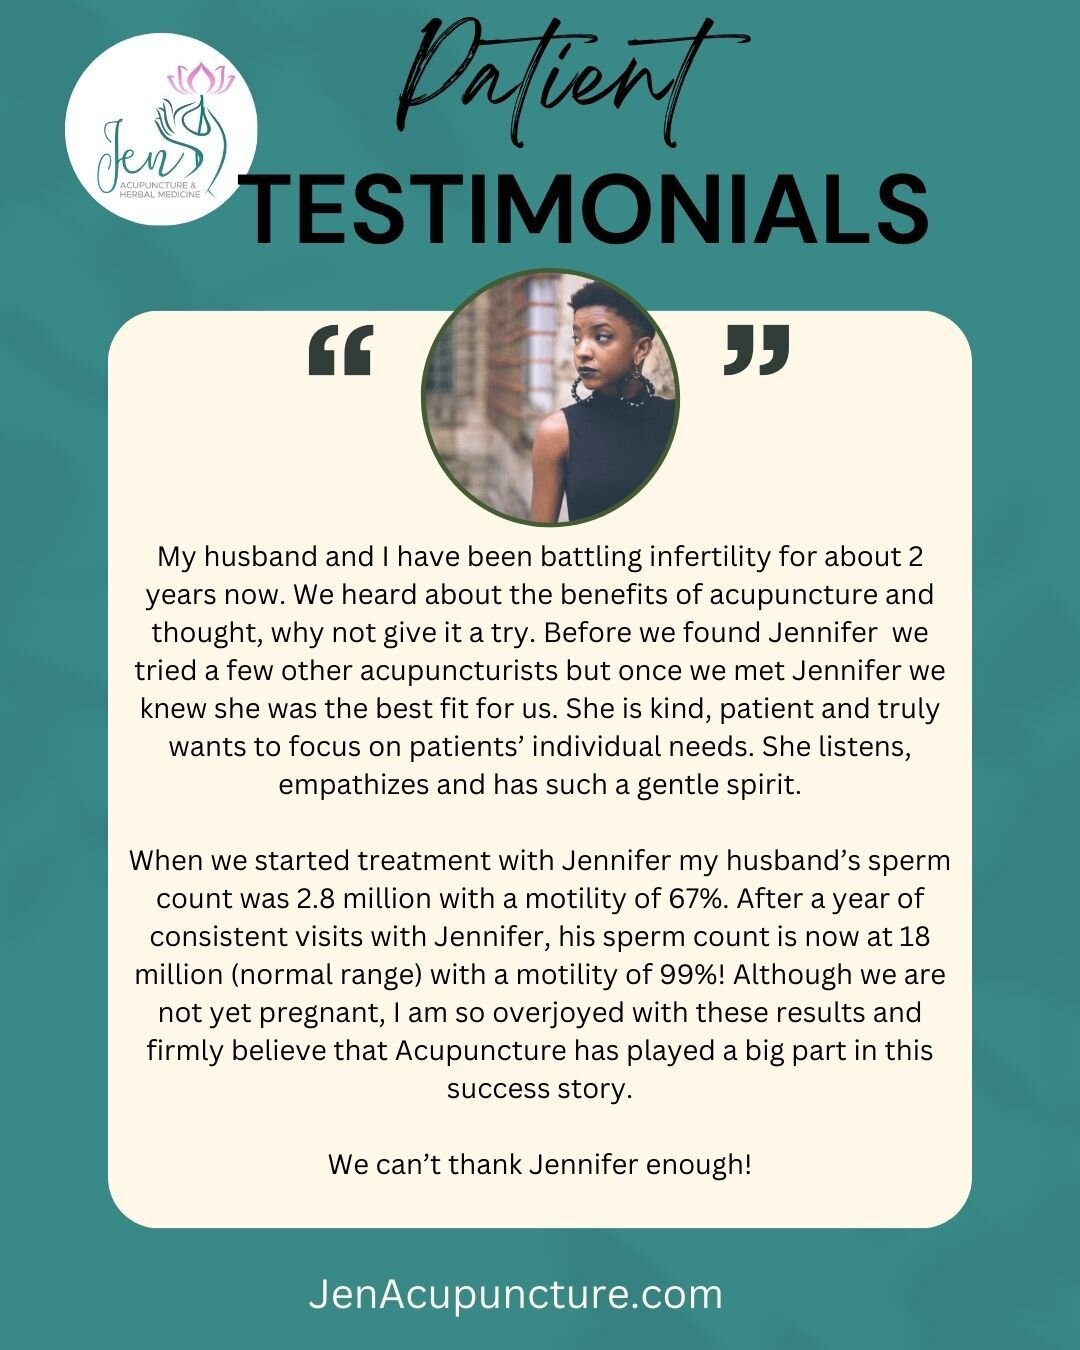 My husband and I have been battling infertility for about 2 years now. We heard about the benefits of acupuncture and thought, why not give it a try. Before we found Jennifer we tried a few other acupuncturists but once we met Jennifer we knew she wa